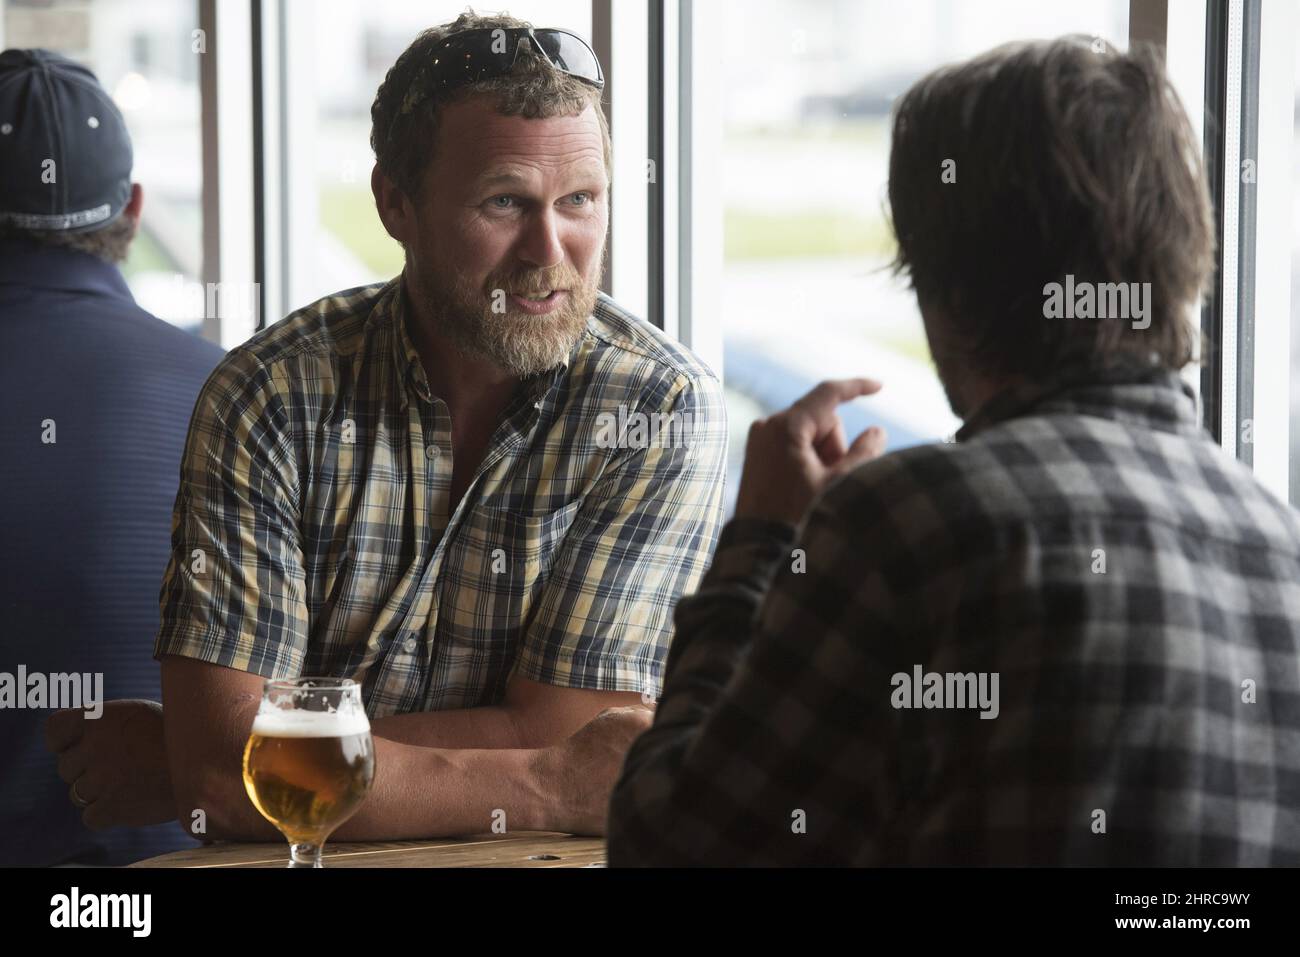 Tayce McAvity, left, and James Hansen enjoy some craft beer at Grimross Craft Brewing in Fredericton, N.B., on Friday, June 16, 2017. The craft brewing industry is booming in Fredericton and officials in New Brunswick's capital are hoping tourists will want to taste what the city has on tap. THE CANADIAN PRESS/Stephen MacGillivray Stock Photo